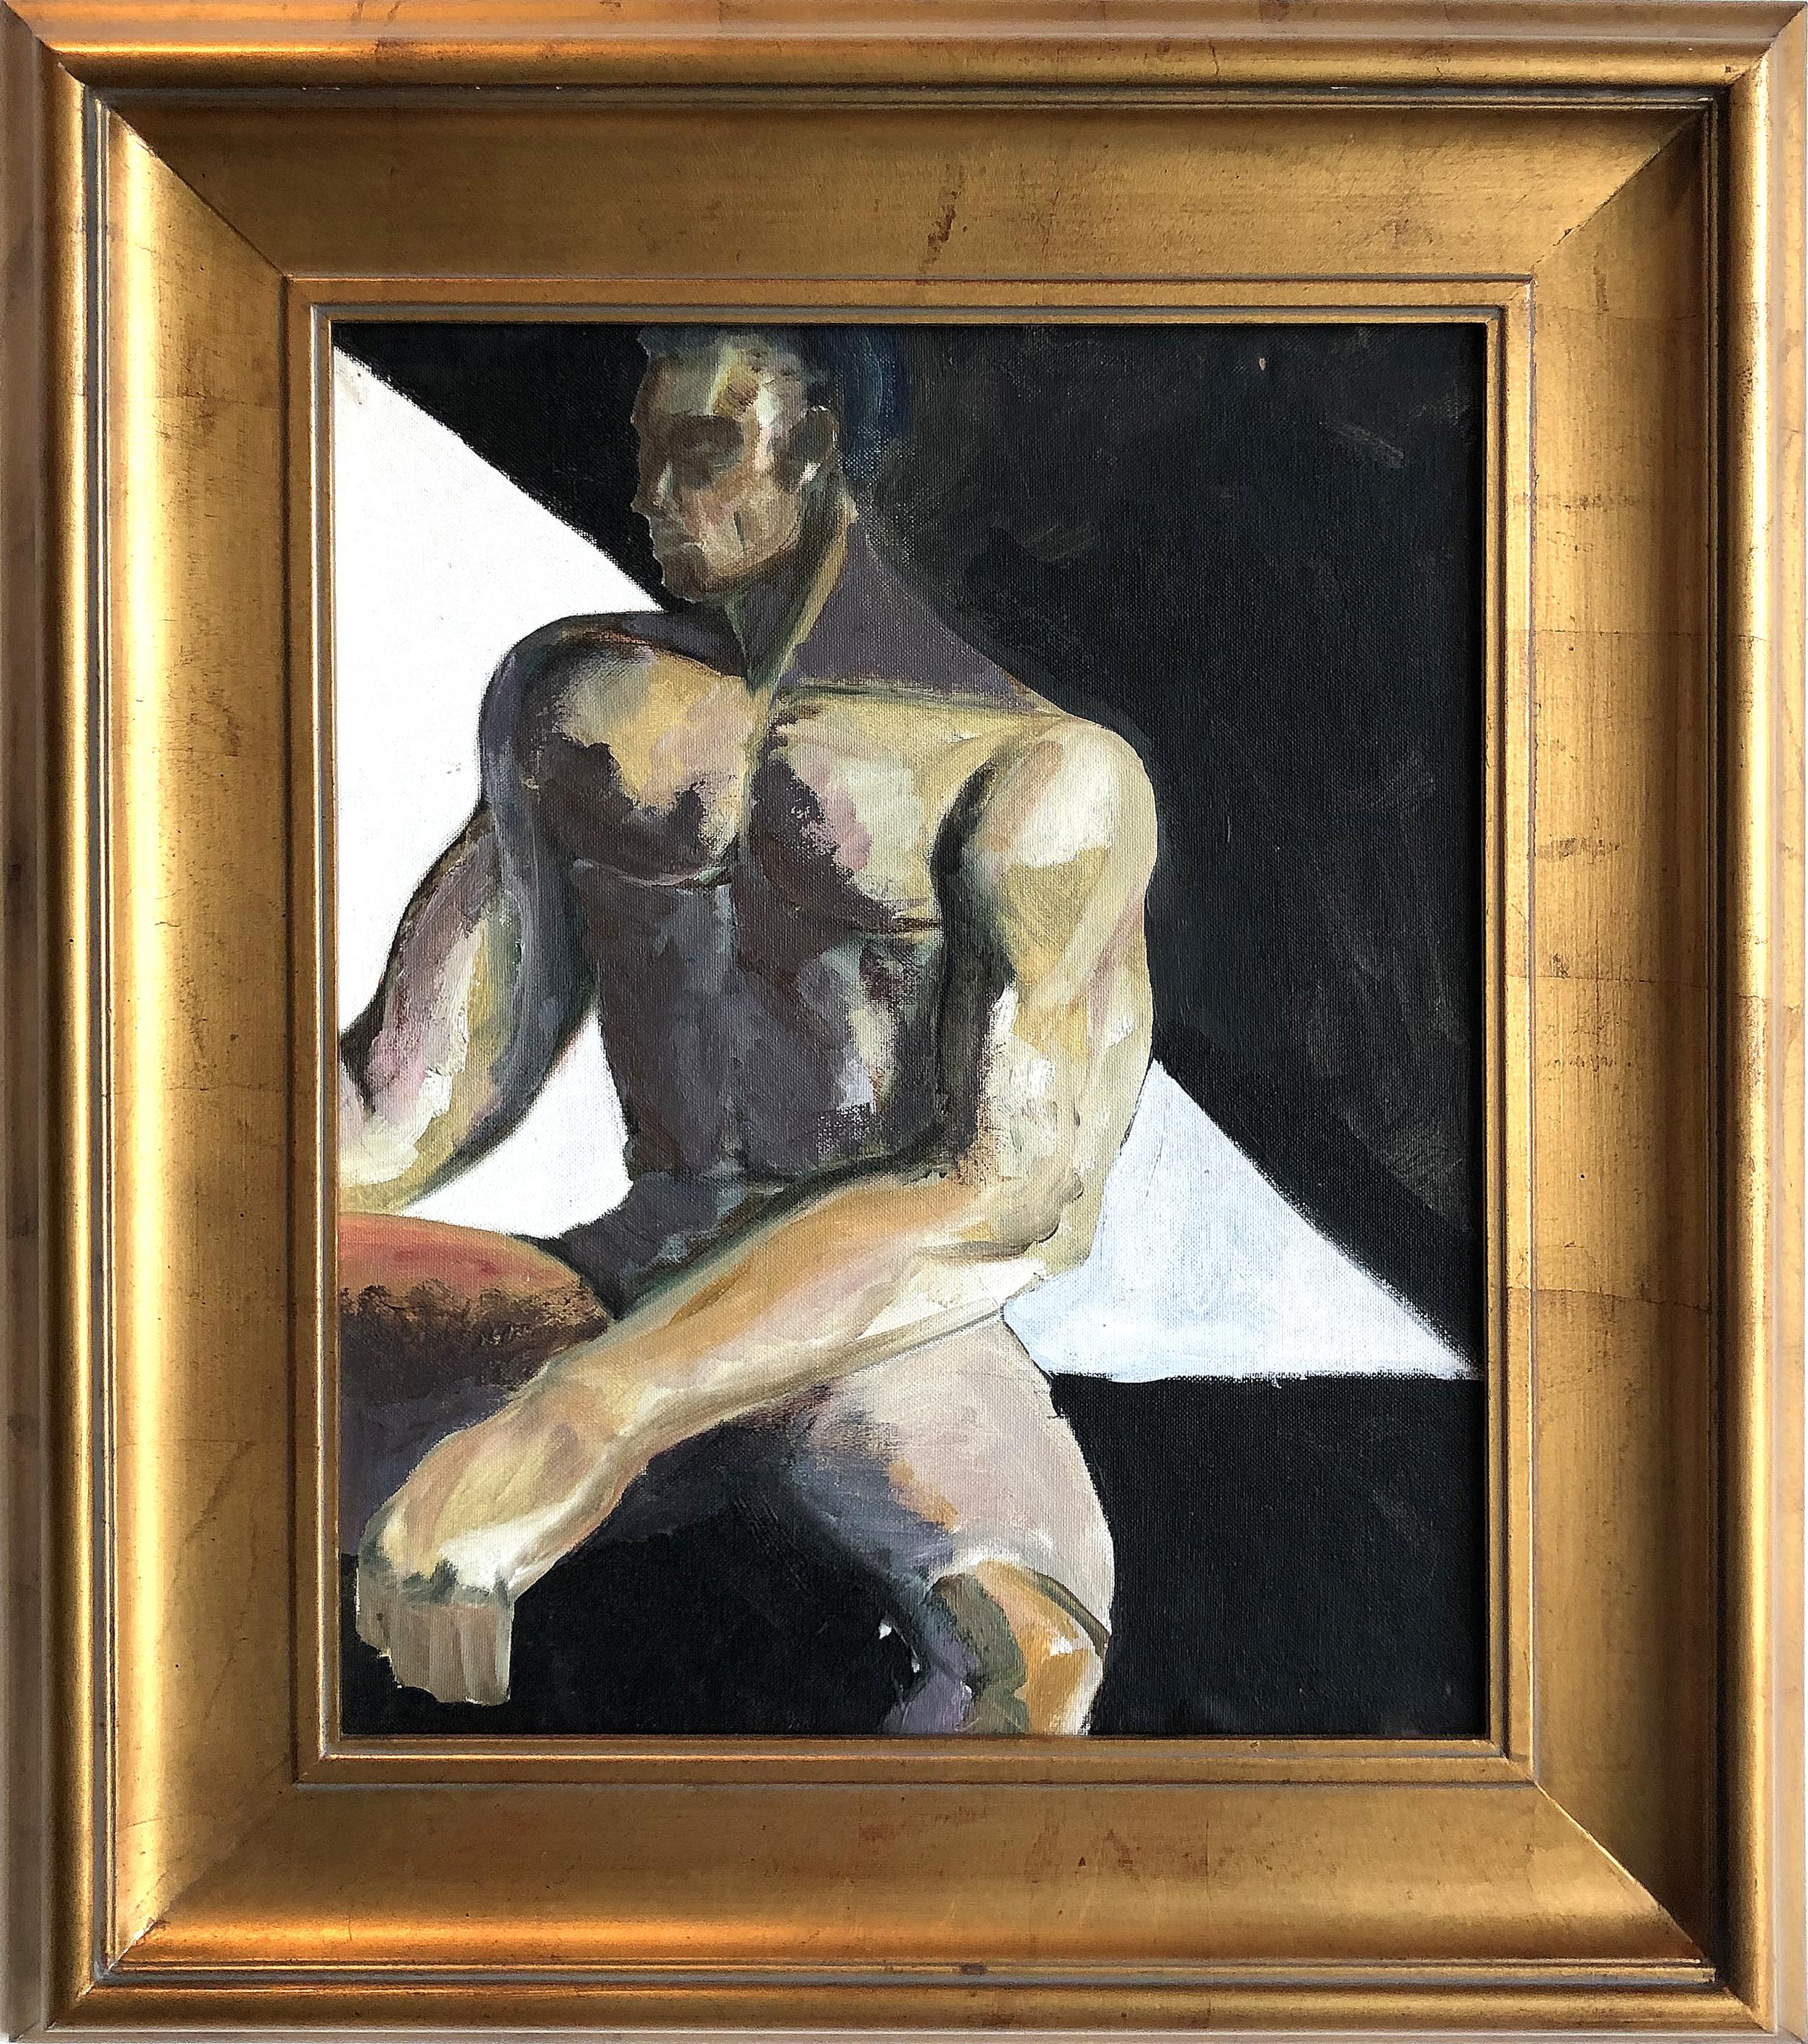 Hand-Painted Vintage Abstract Black Male Nude Art Study Oil Painting